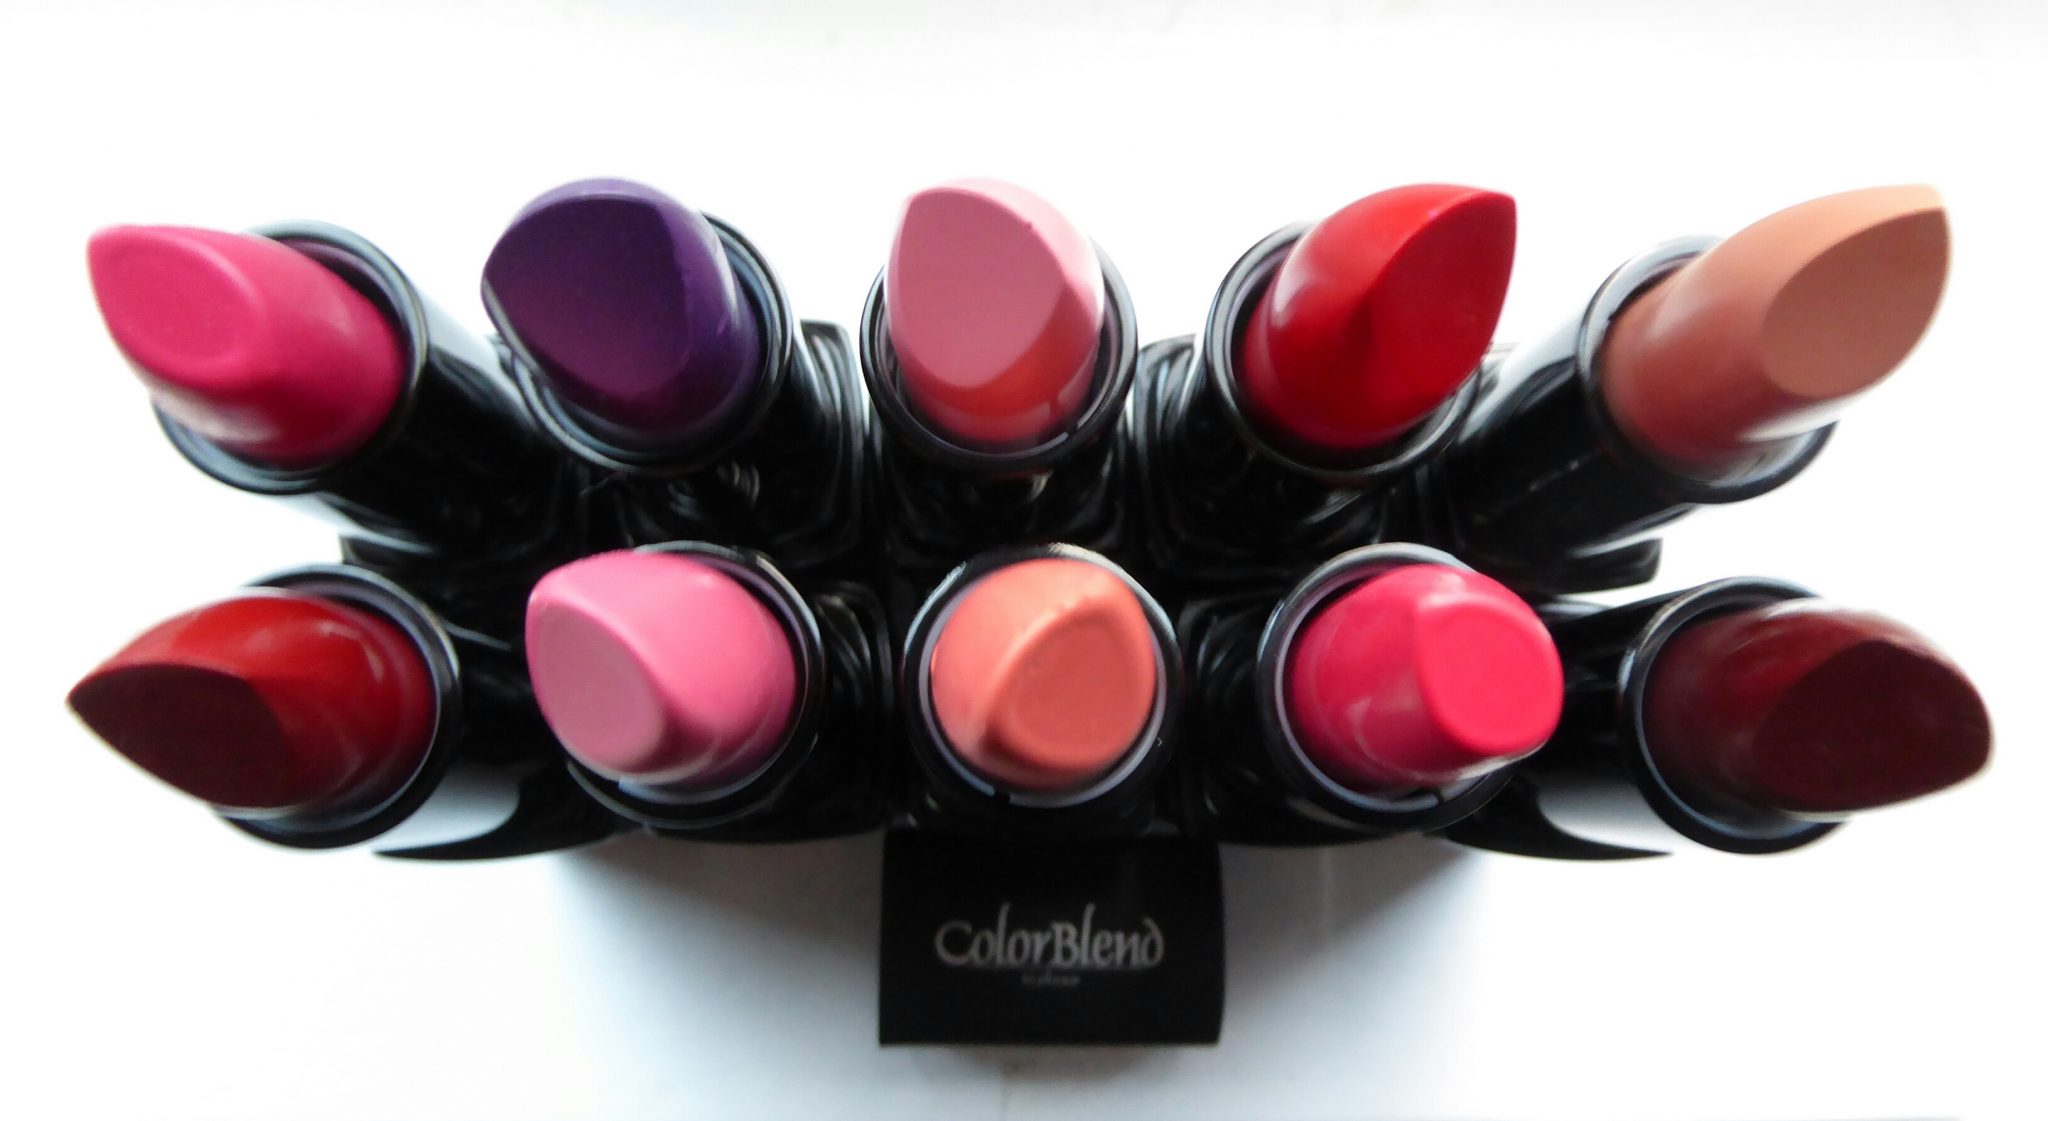 Discovering ColorBlend: A quality makeup brand 